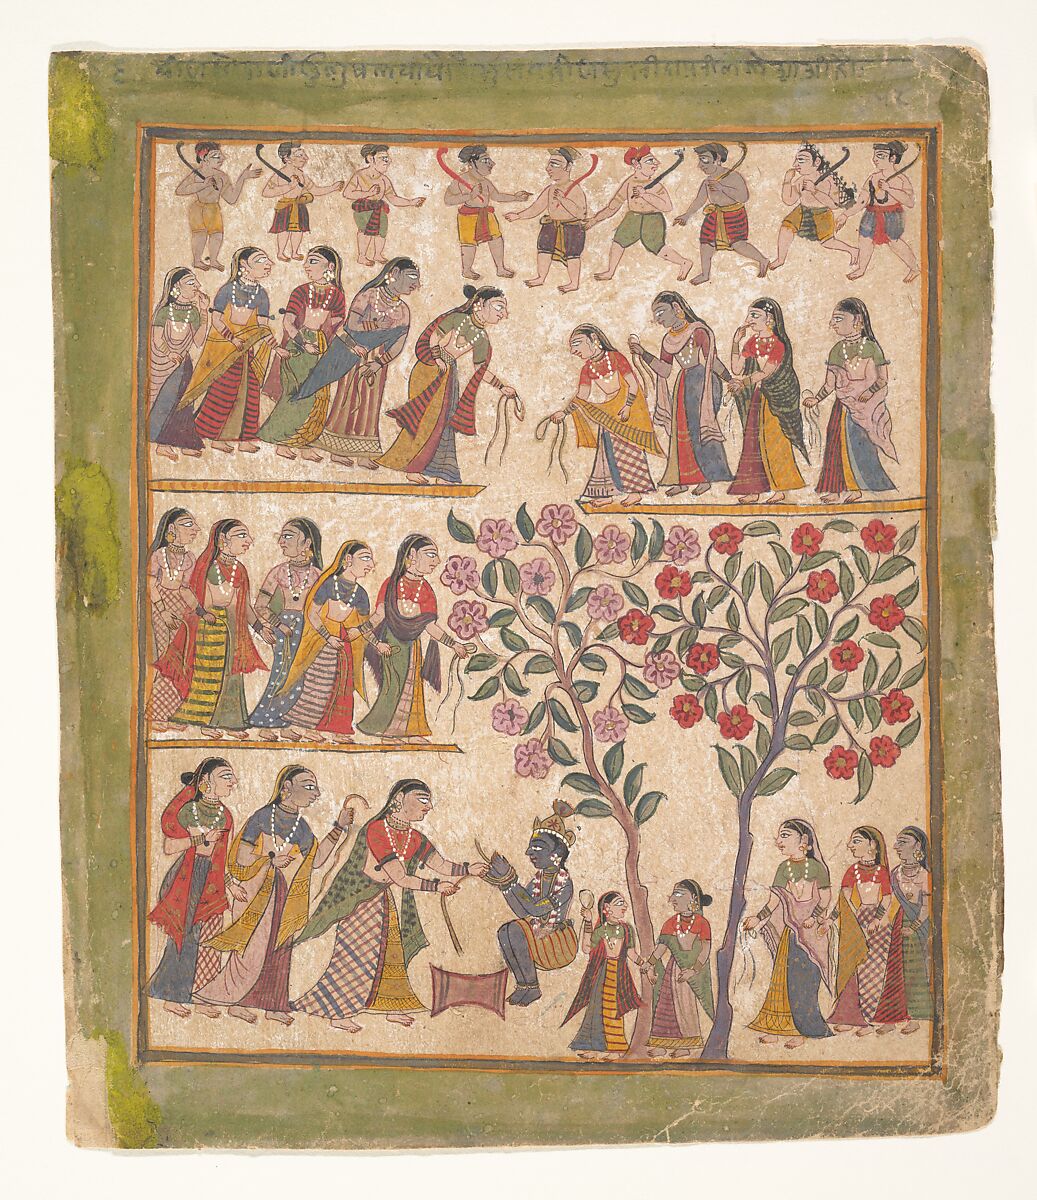 Yashoda Binds Krishna’s Hands: Page from a Dispersed Bhagavata Purana Manuscript, Ink and opaque watercolor on paper, India (Gujarat) 